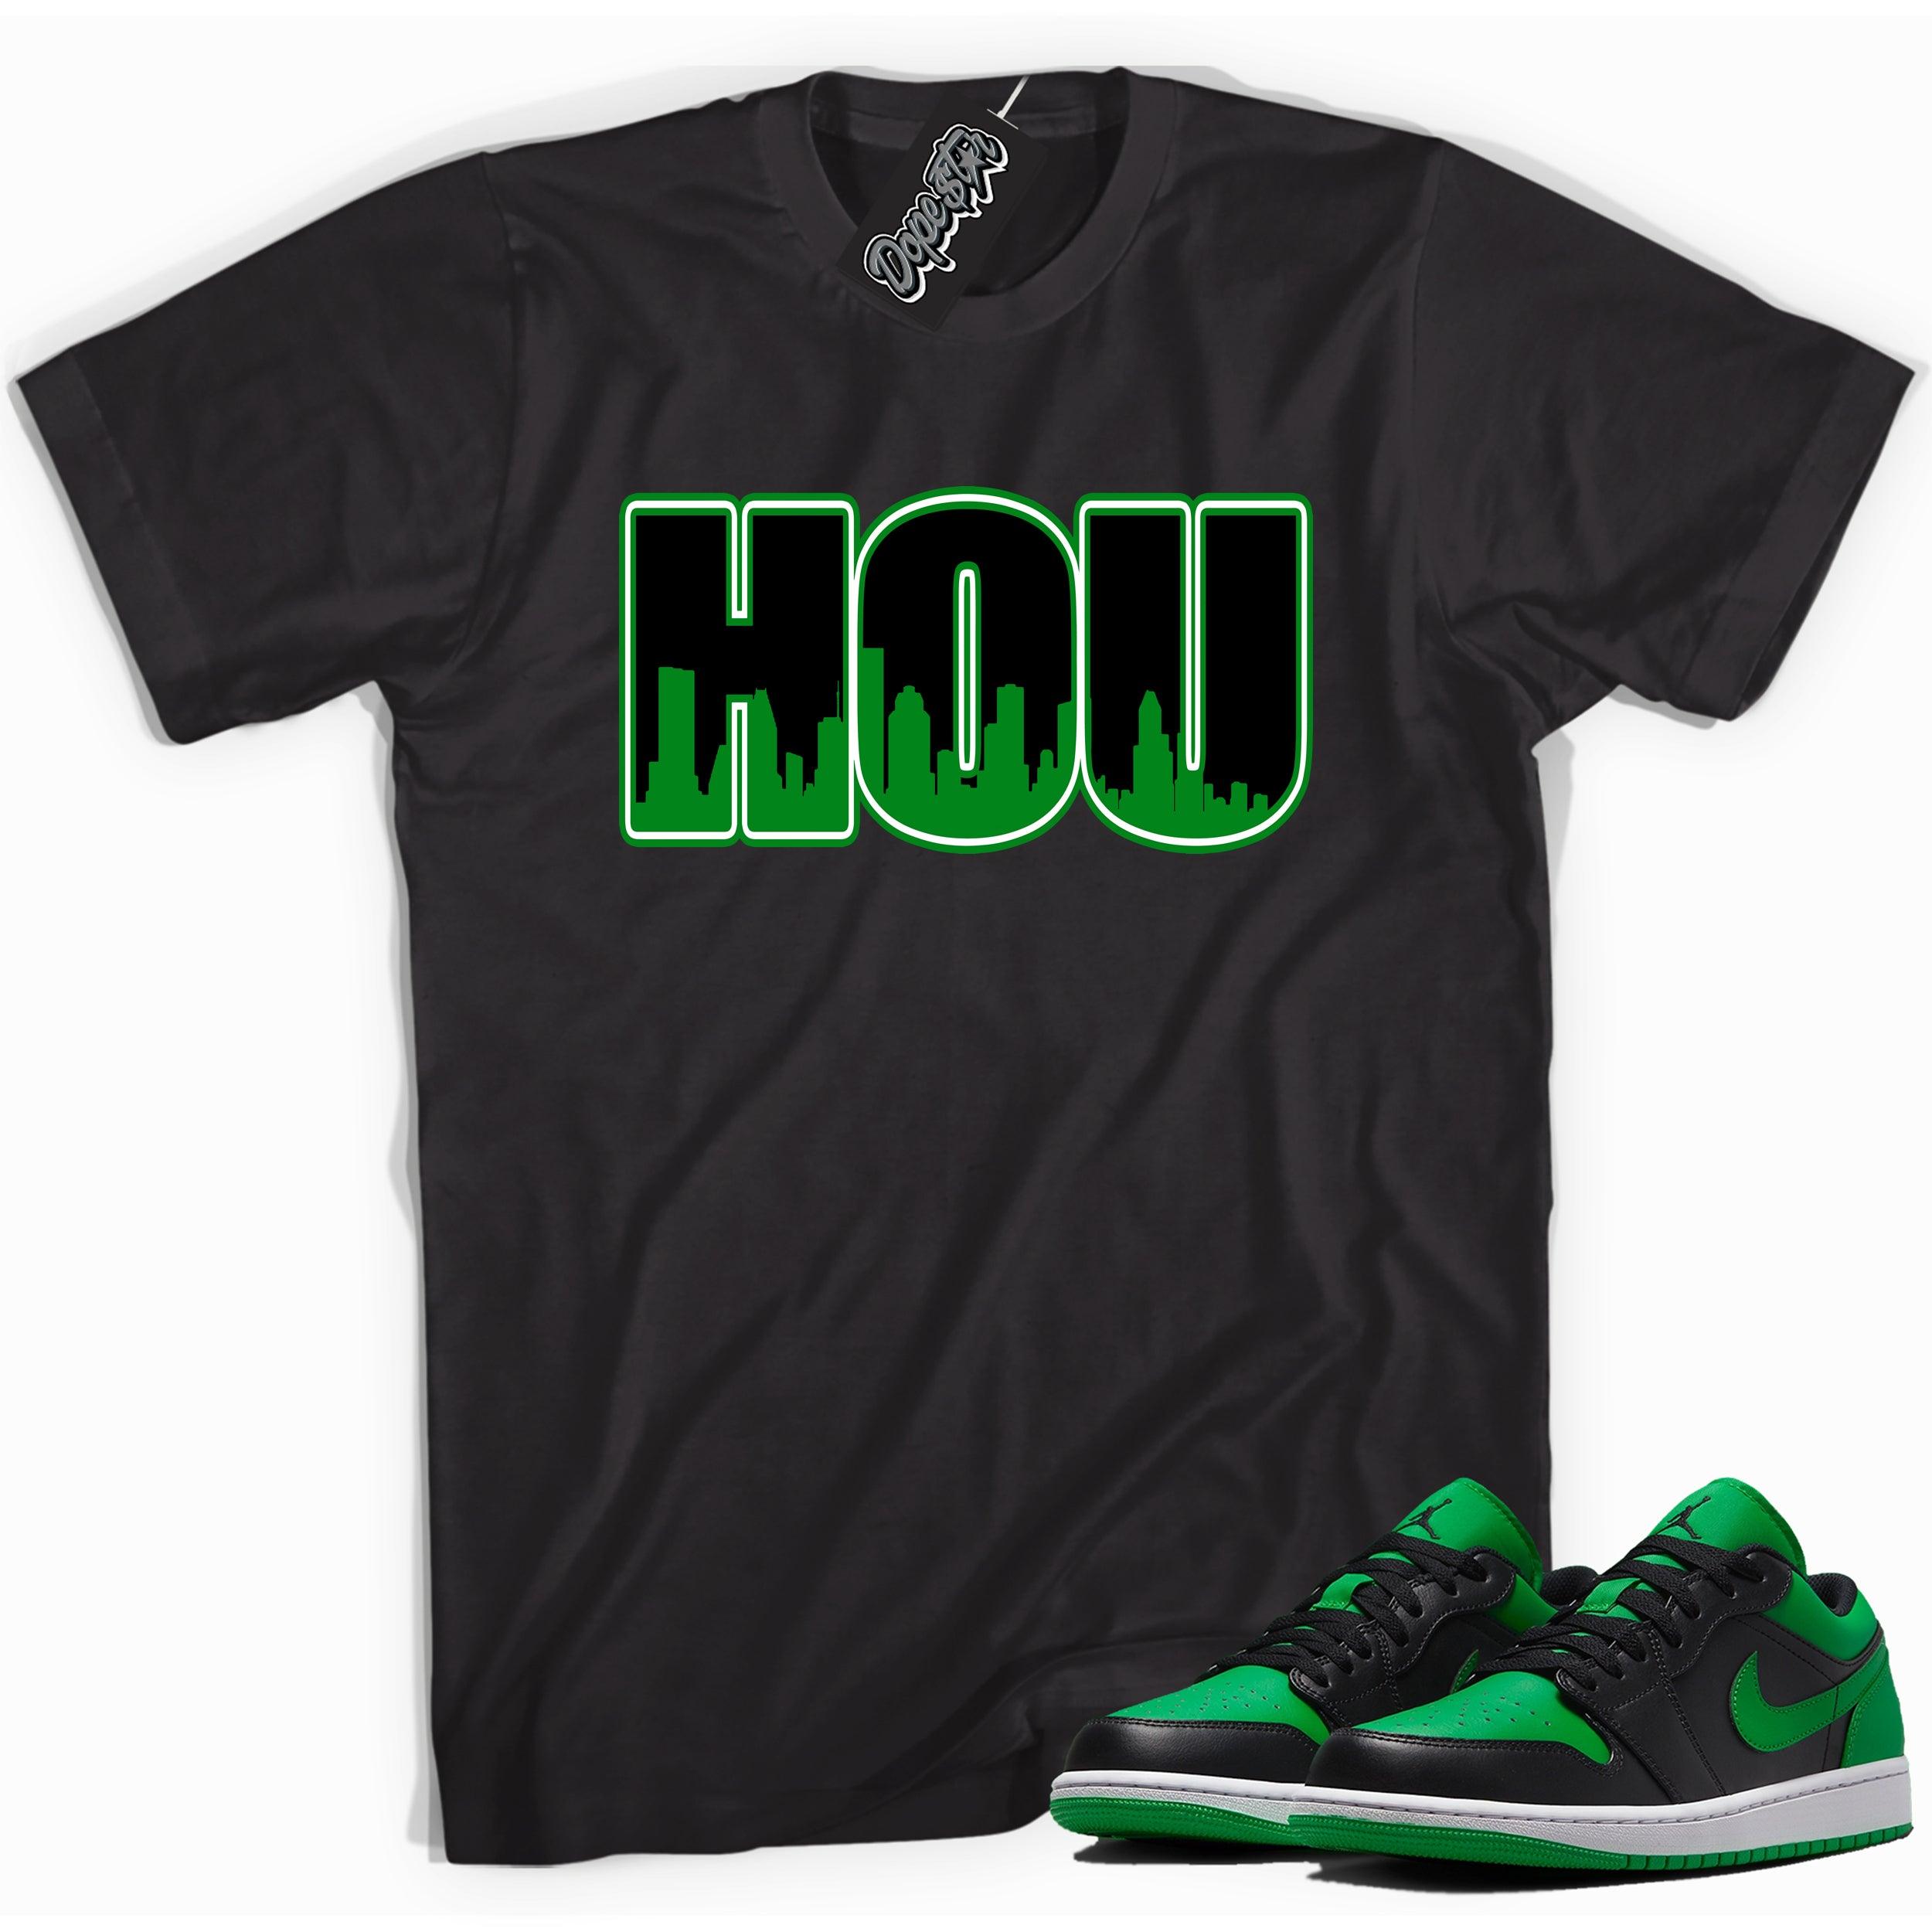 Cool black graphic tee with 'HOU' print, that perfectly matches Air Jordan 1 Low Lucky Green sneakers